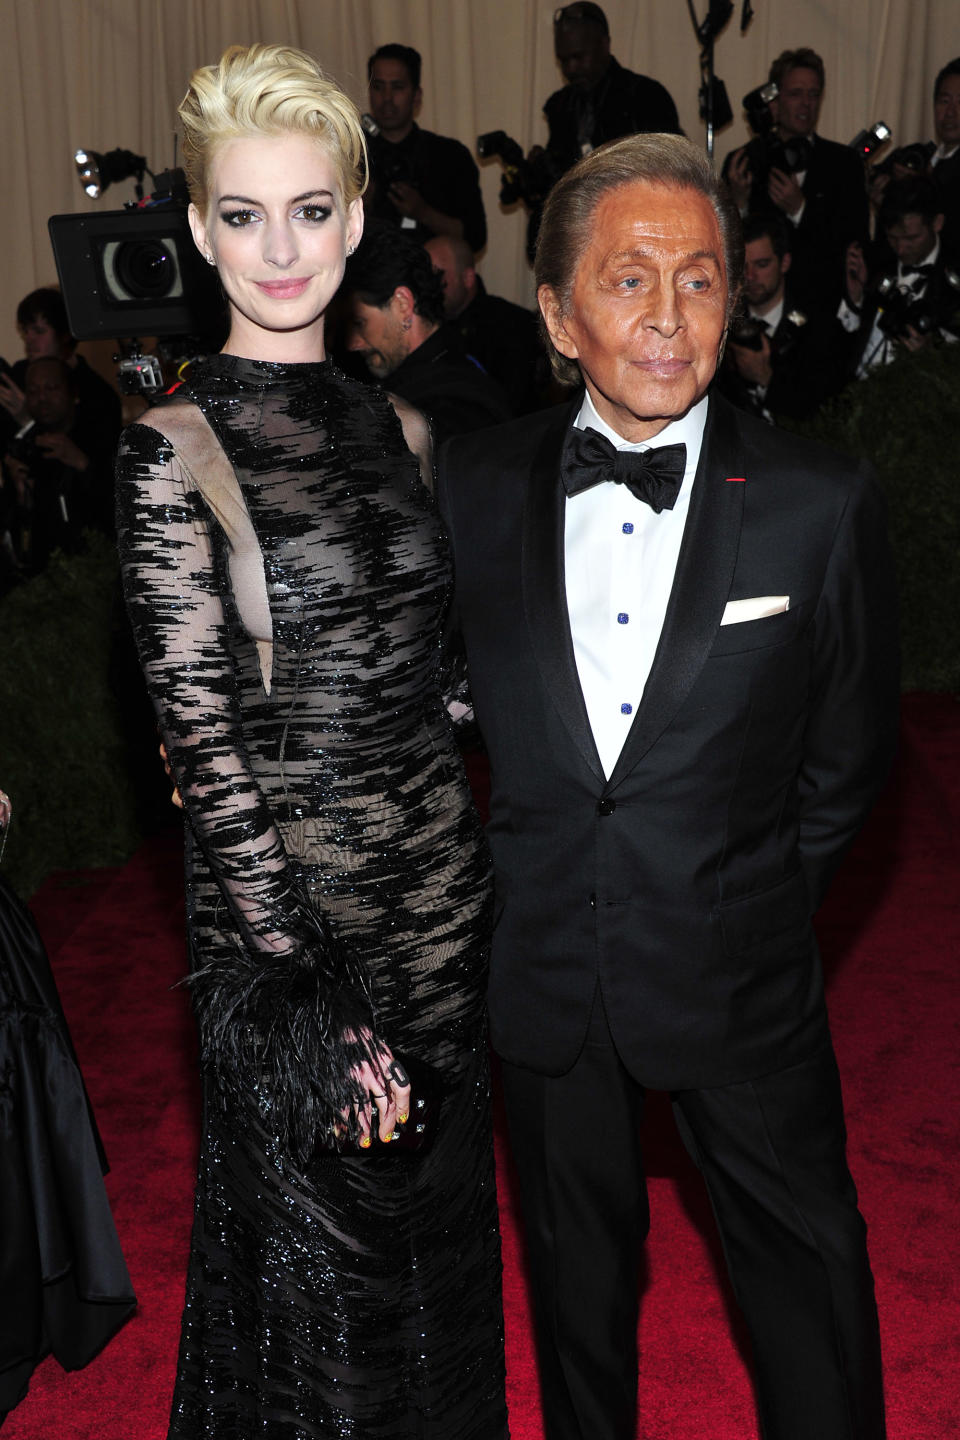 Anne Hathaway, left, and Valentino Garavani attends The Metropolitan Museum of Art's Costume Institute benefit celebrating "PUNK: Chaos to Couture" on Monday May 6, 2013 in New York. (Photo by Charles Sykes/Invision/AP)